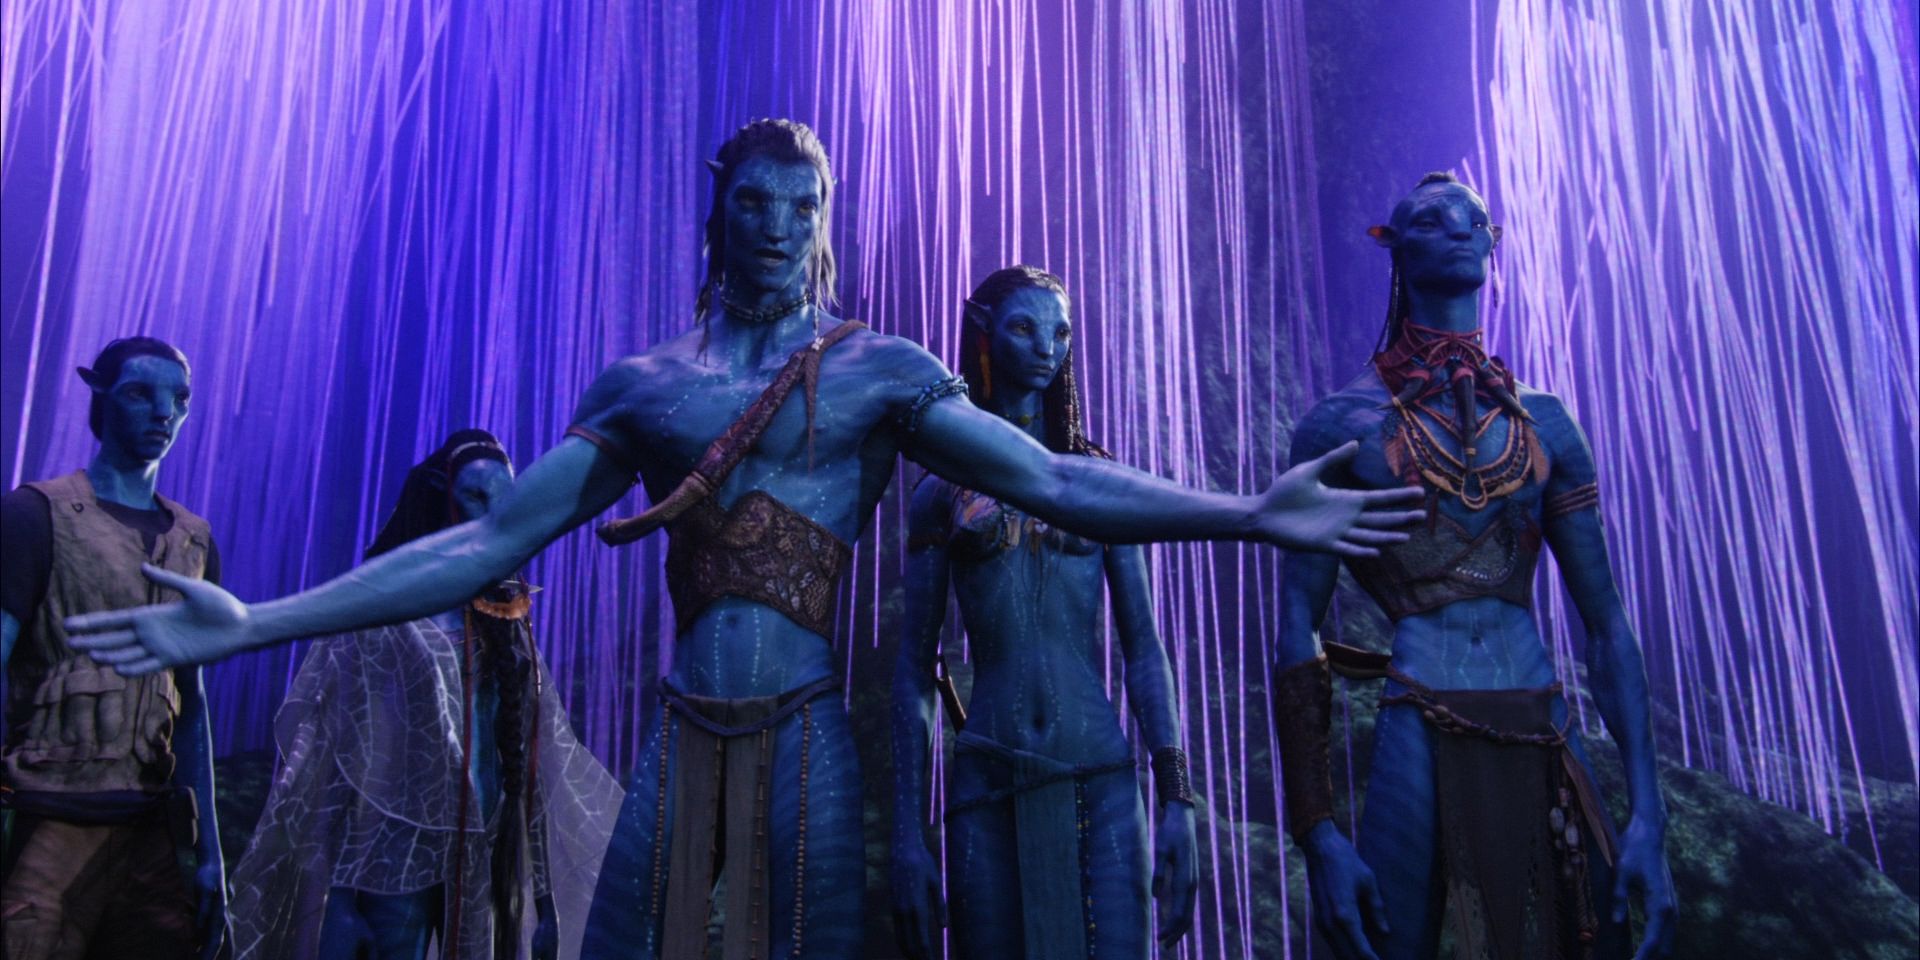 A meeting between the Na'vi occurs on Pandora in Avatar